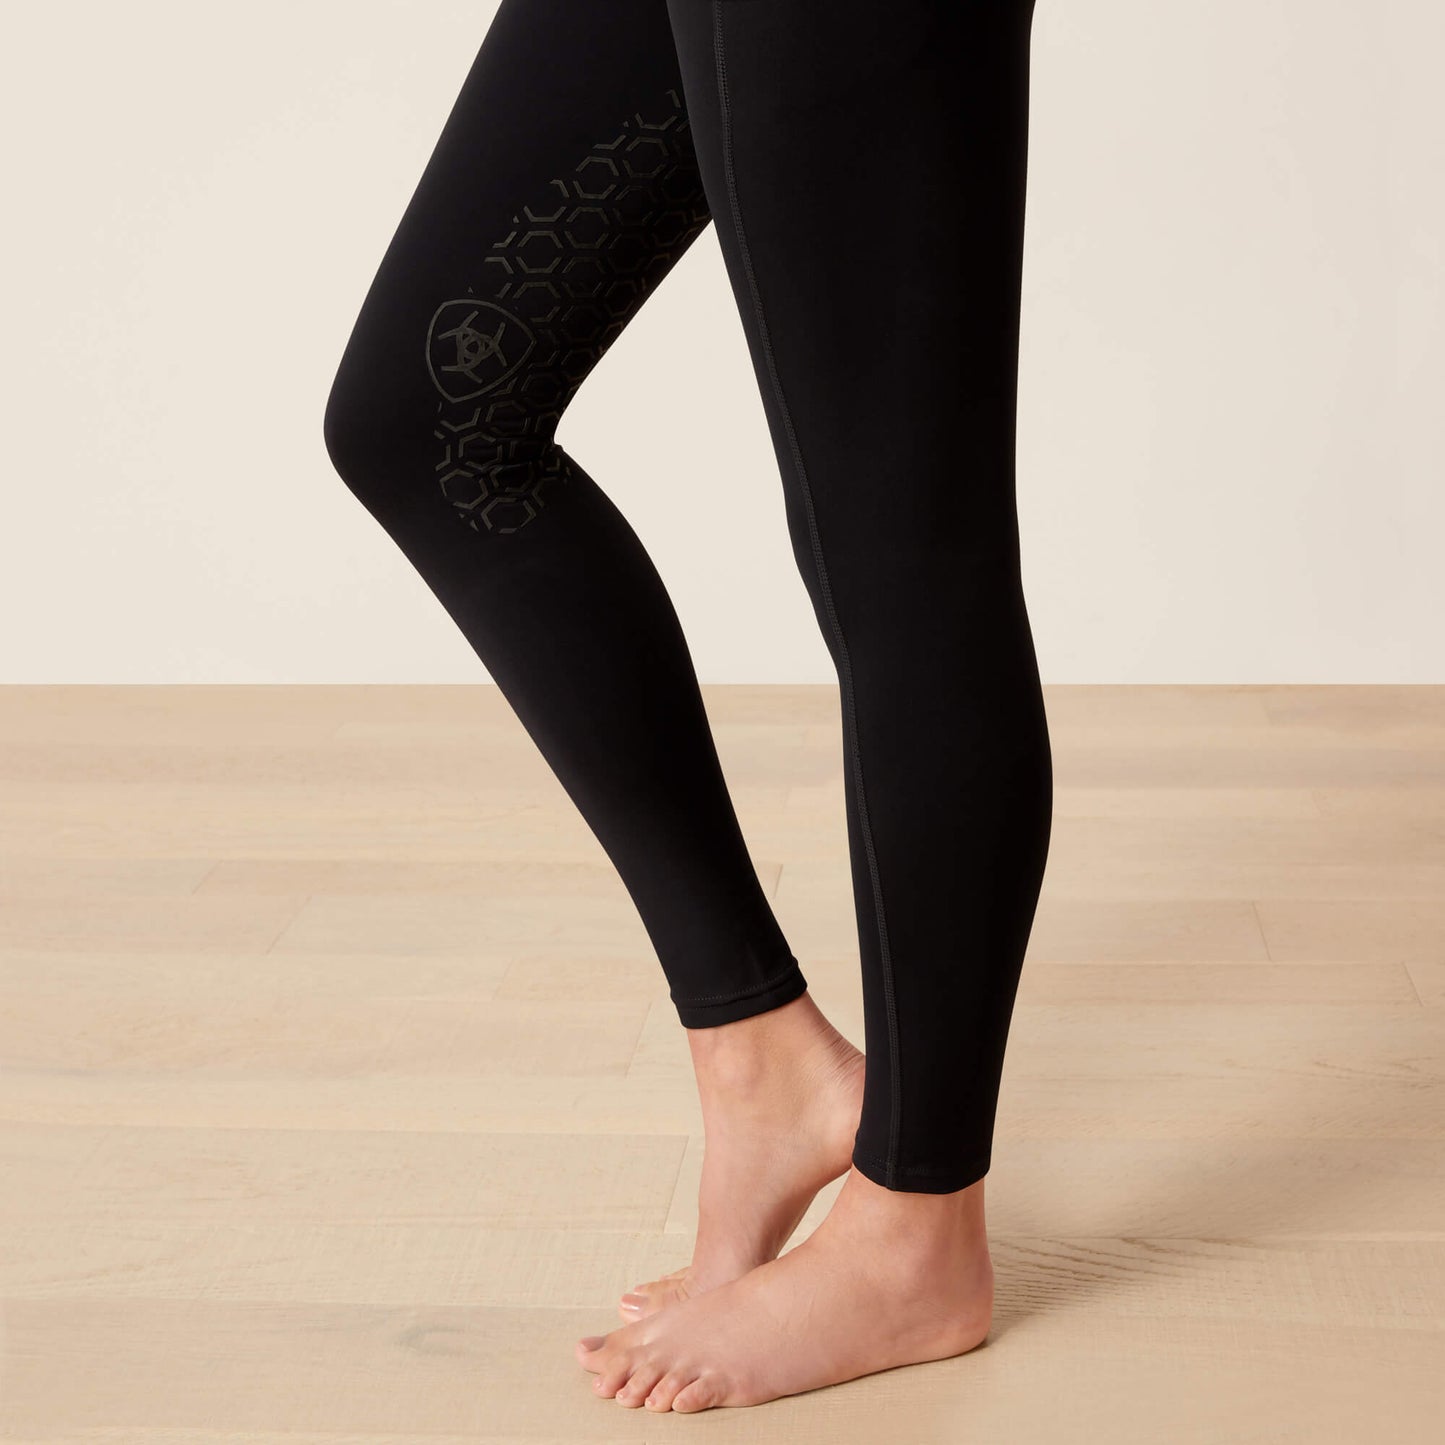 Ariat Black Avail Riding Tights with Half Grip